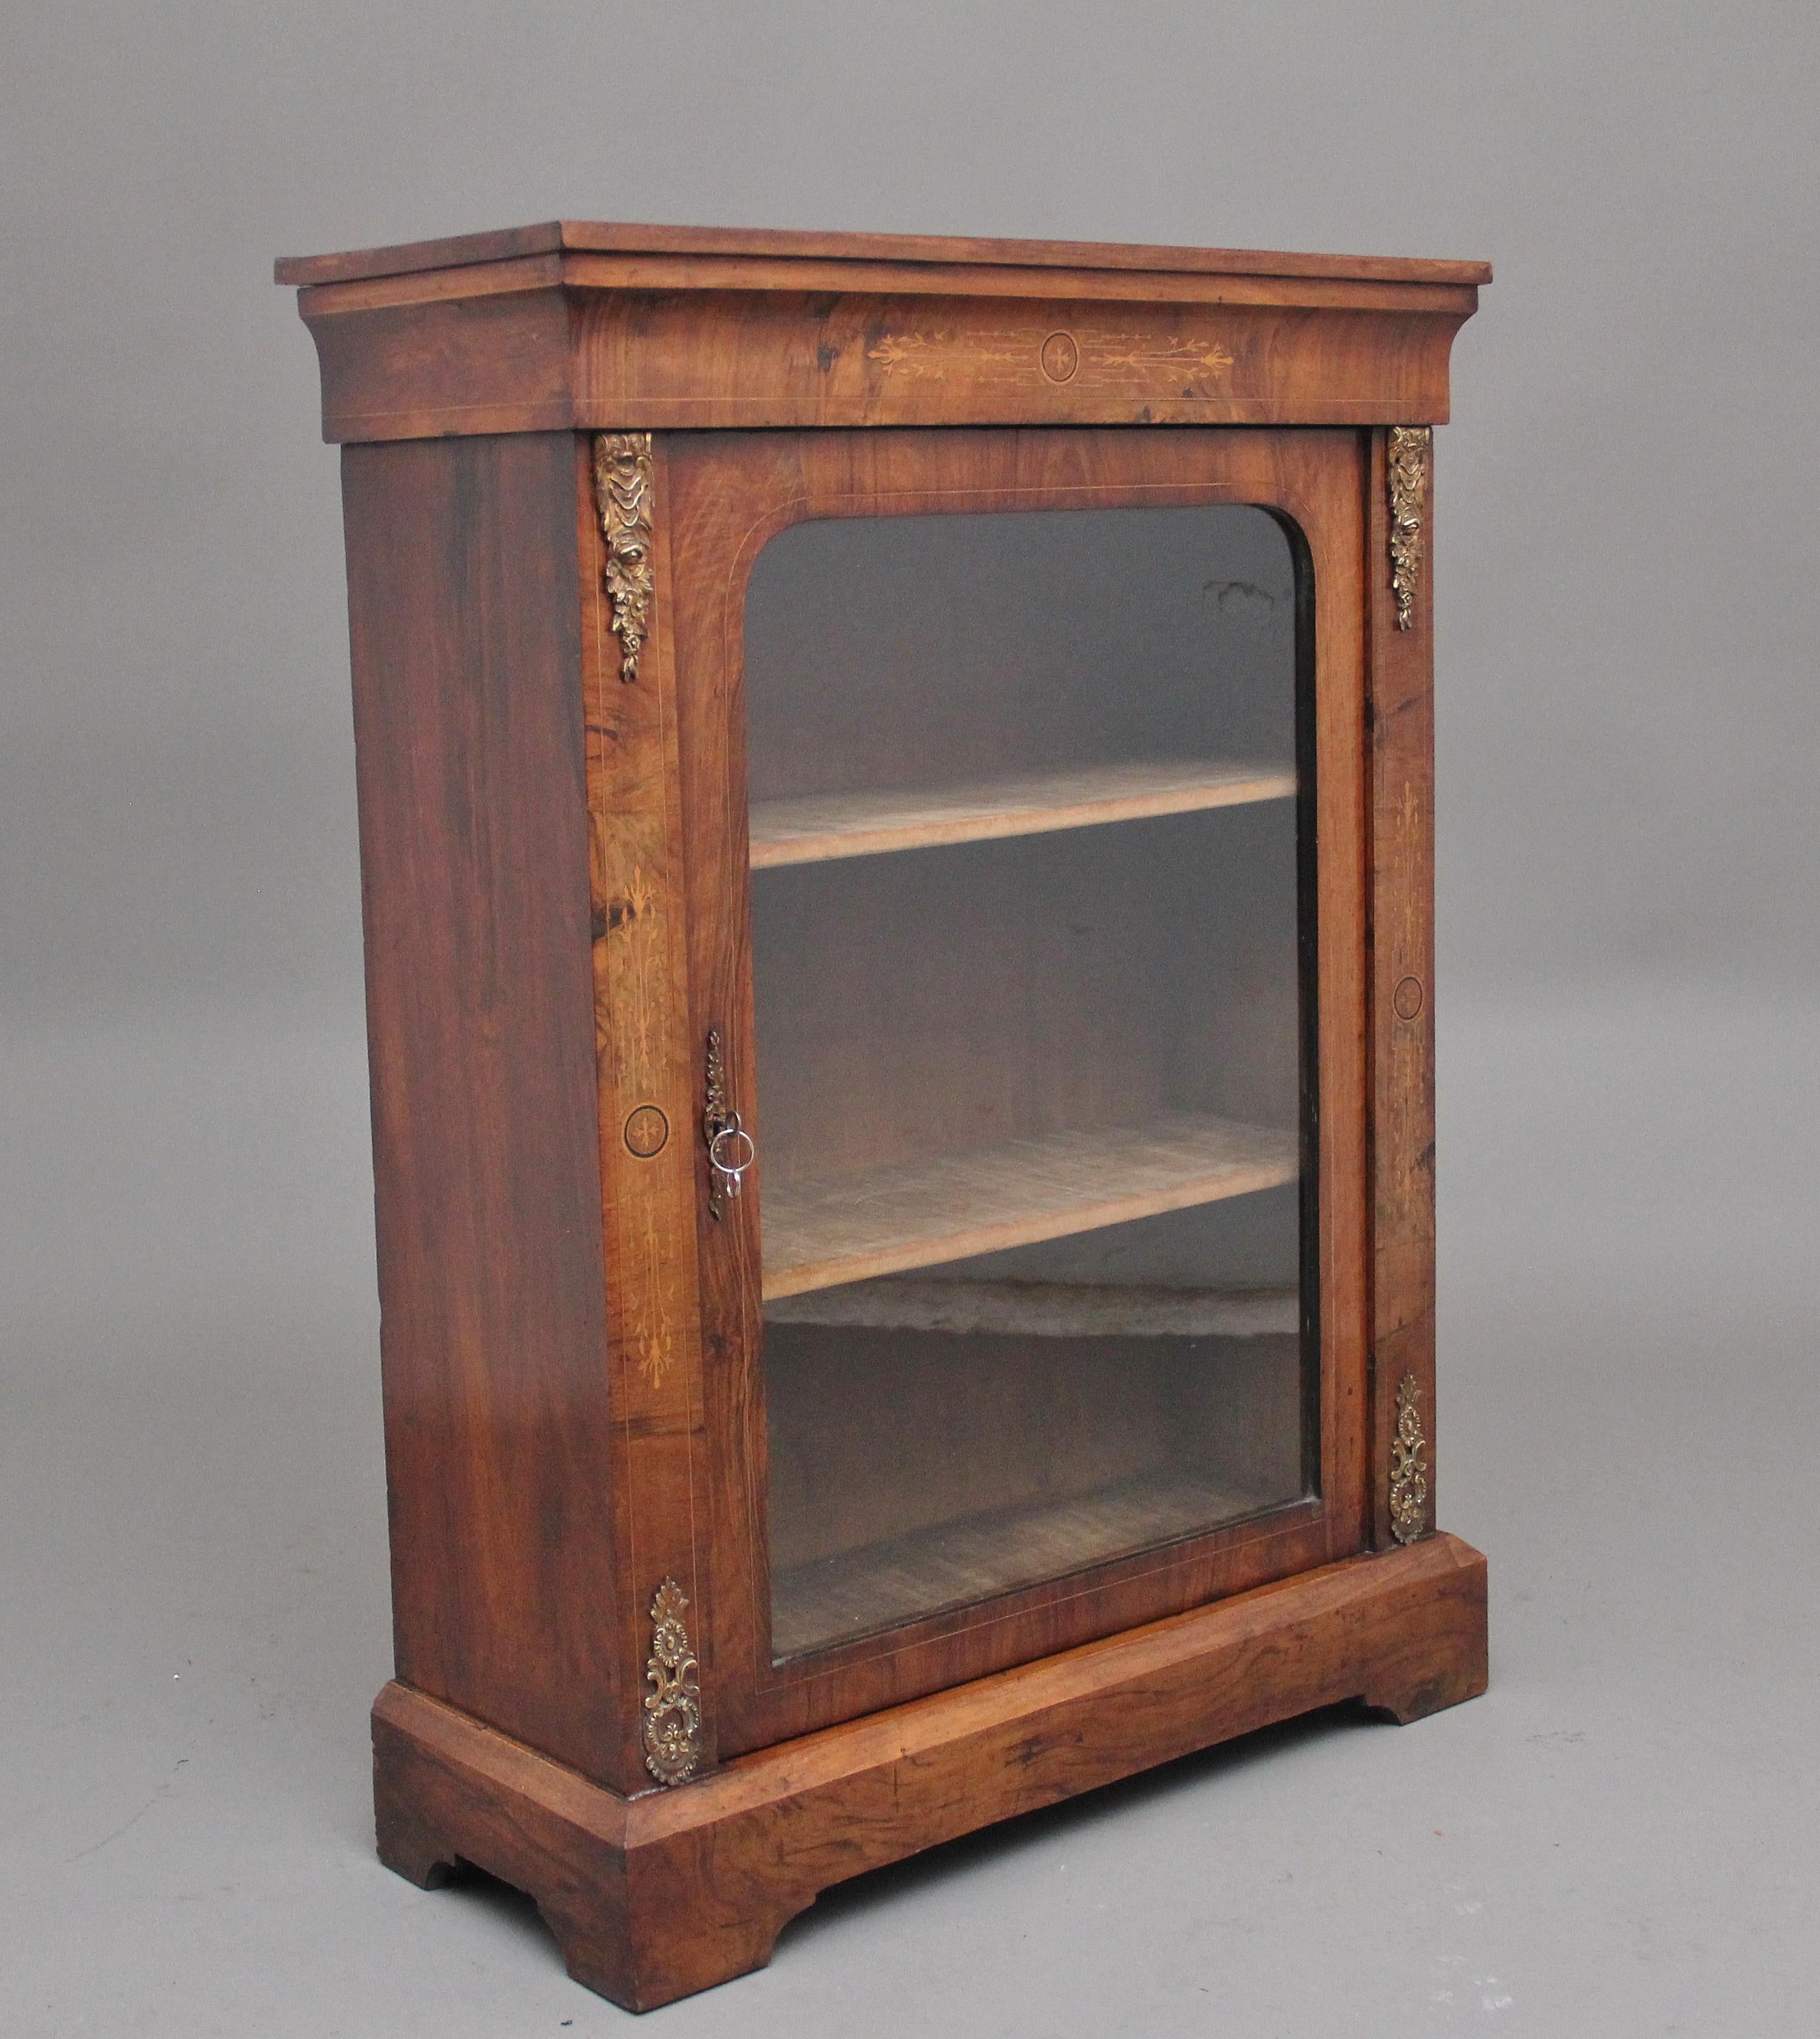 19th Century walnut and marquetry pier cabinet, having a nice figured stepped and moulded edge top above a marquetry inlaid frieze with decorative inlay, a single glazed door below opening to reveal two fixed shelves, either side of the door having